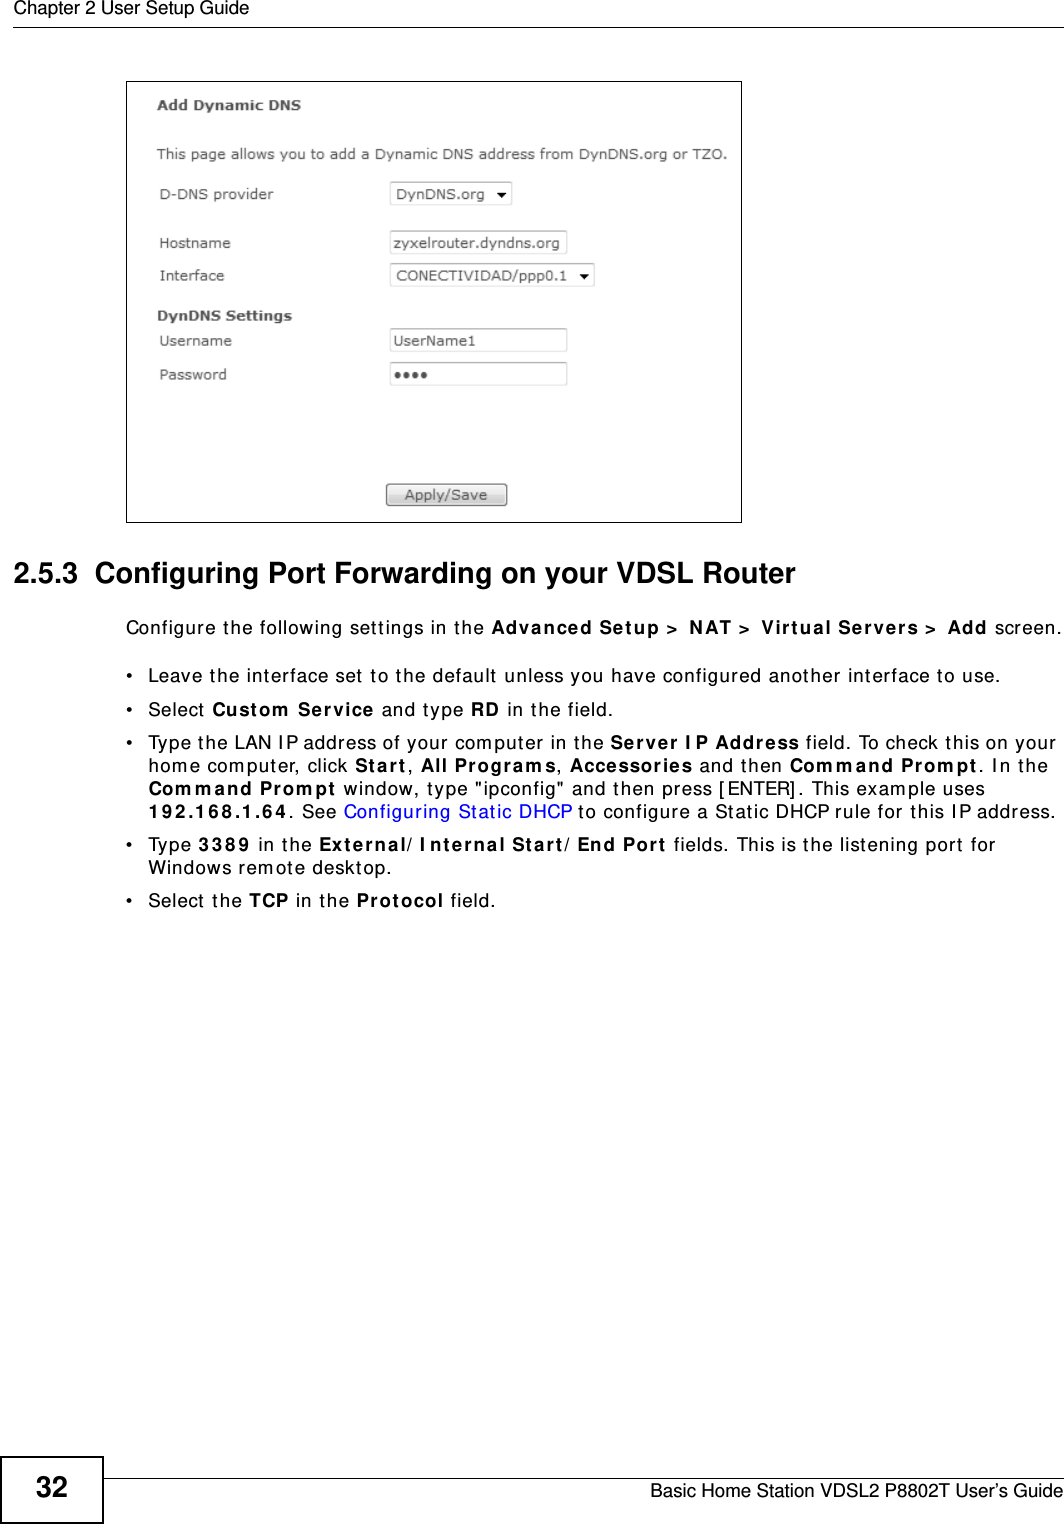 Chapter 2 User Setup GuideBasic Home Station VDSL2 P8802T User’s Guide322.5.3  Configuring Port Forwarding on your VDSL RouterConfigure t he following set t ings in t he Adva nce d Se tup &gt;  N AT &gt;  Virtua l Ser ve rs &gt;  Add screen.• Leave t he inter face set  to the default  unless you have configured another interface t o use.• Select Cust om  Service  and type RD in the field.• Type the LAN I P address of your com puter in the Ser ver  I P Addr e ss f ield. To ch eck  t his on y our  hom e computer, click St ar t , All Pr ogram s, Acce ssor ies and t hen Com m and Prom pt. I n the Com m a nd Pr om pt window, type &quot; ipconfig&quot; and t hen press [ ENTER] . This exam ple uses 1 9 2 .1 6 8 .1 .6 4 . See Configuring St at ic DHCP to configure a Stat ic DHCP rule for t his I P address. • Type 3 3 8 9  in the Exter na l/ I nt ern al St a rt/ End Por t  fields. This is t he listening port for Windows rem ot e desktop.• Select  the TCP in t he Pro t ocol field.